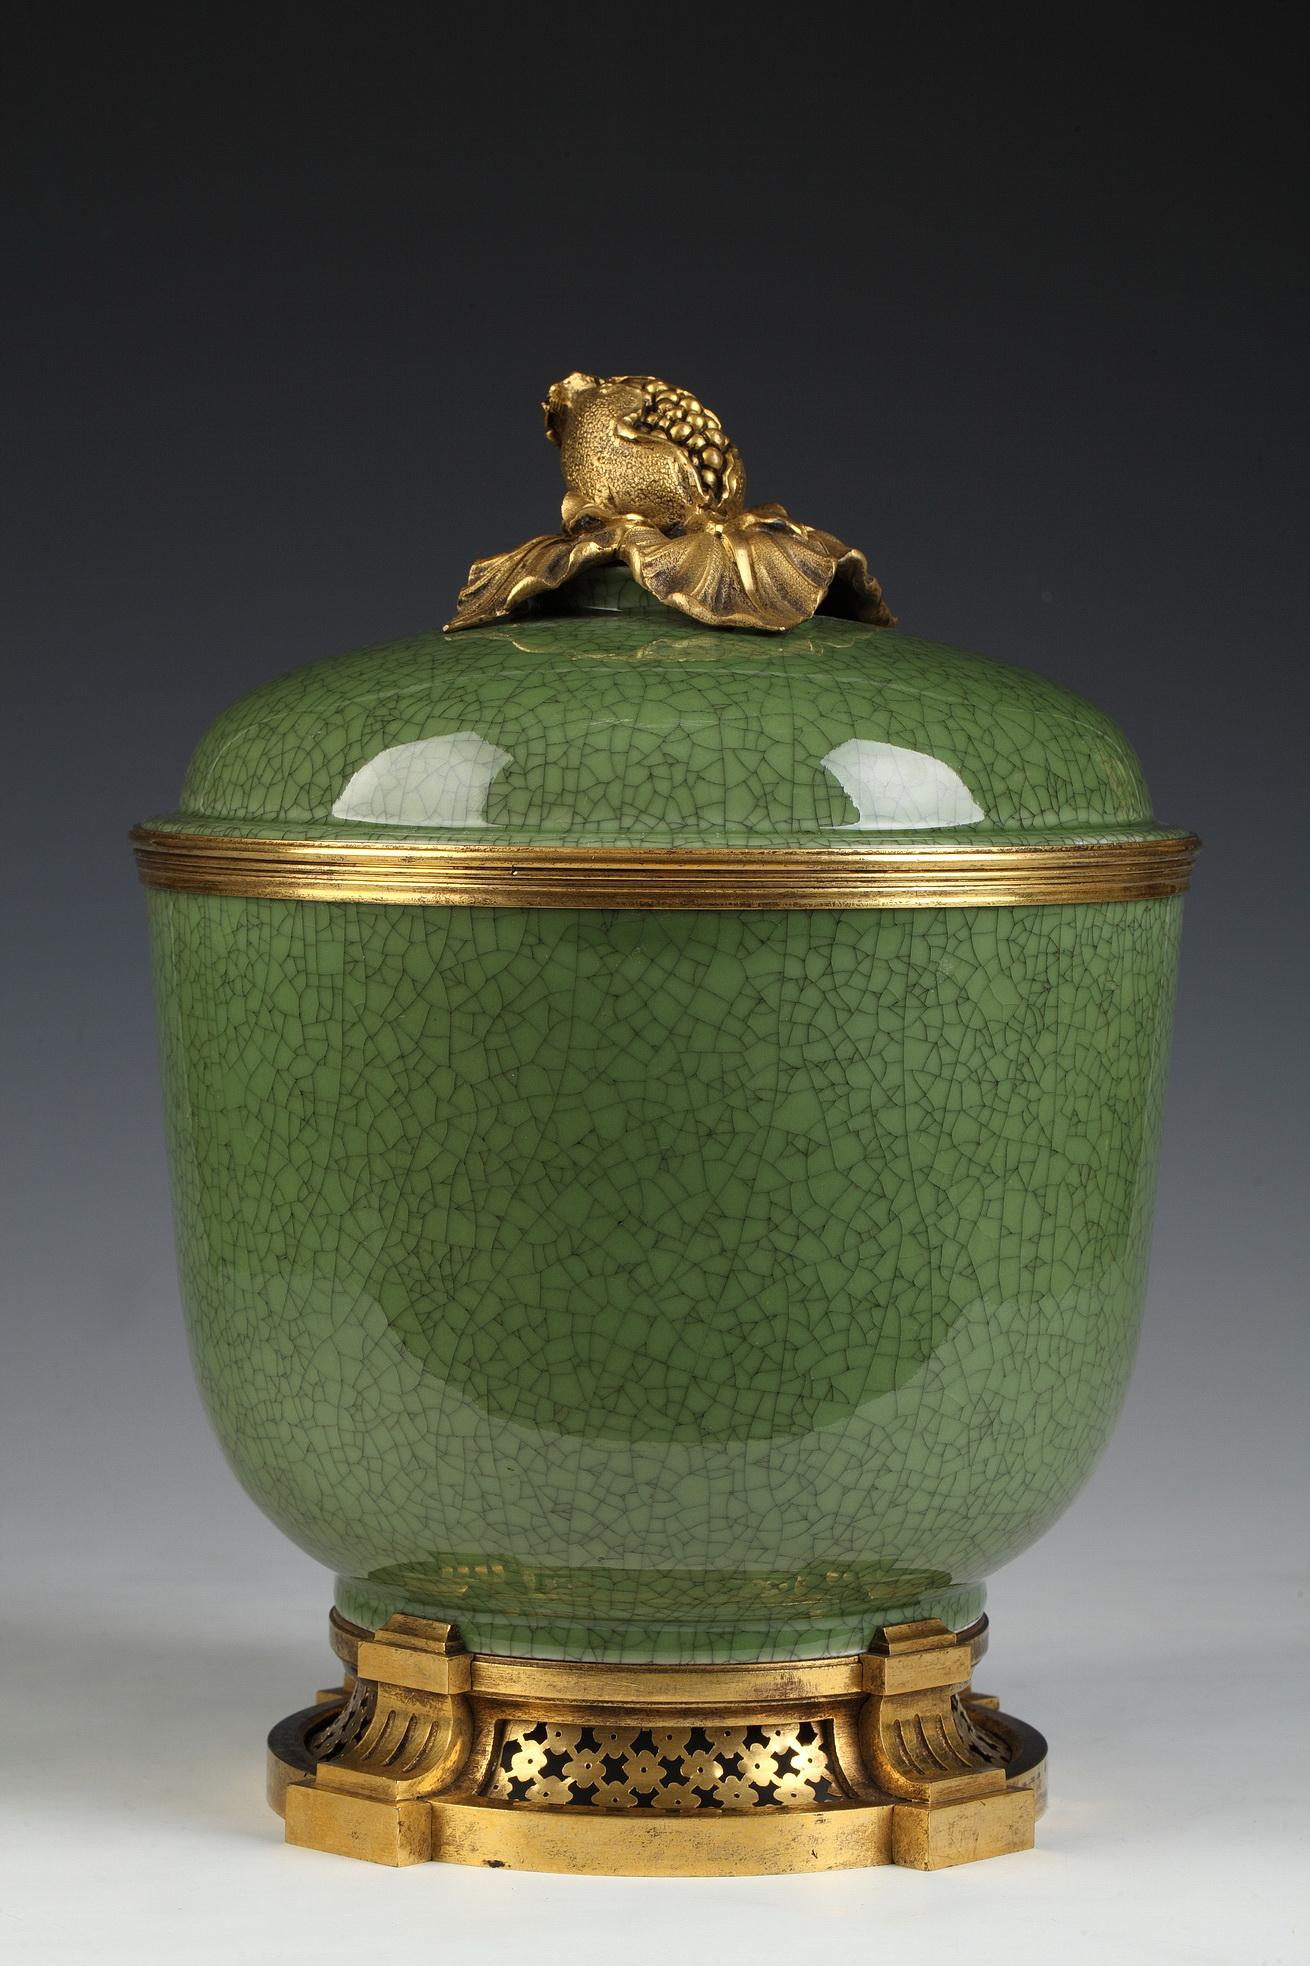 Celadon porcelain jar with gilt-bronze mounts attributed to l'Escalier de Cristal. The jar relies on a gilt-bronze base with four ribbed consoles joined by open-work wire nets on a large moulding. A gilt-bronze circle separates the body from the